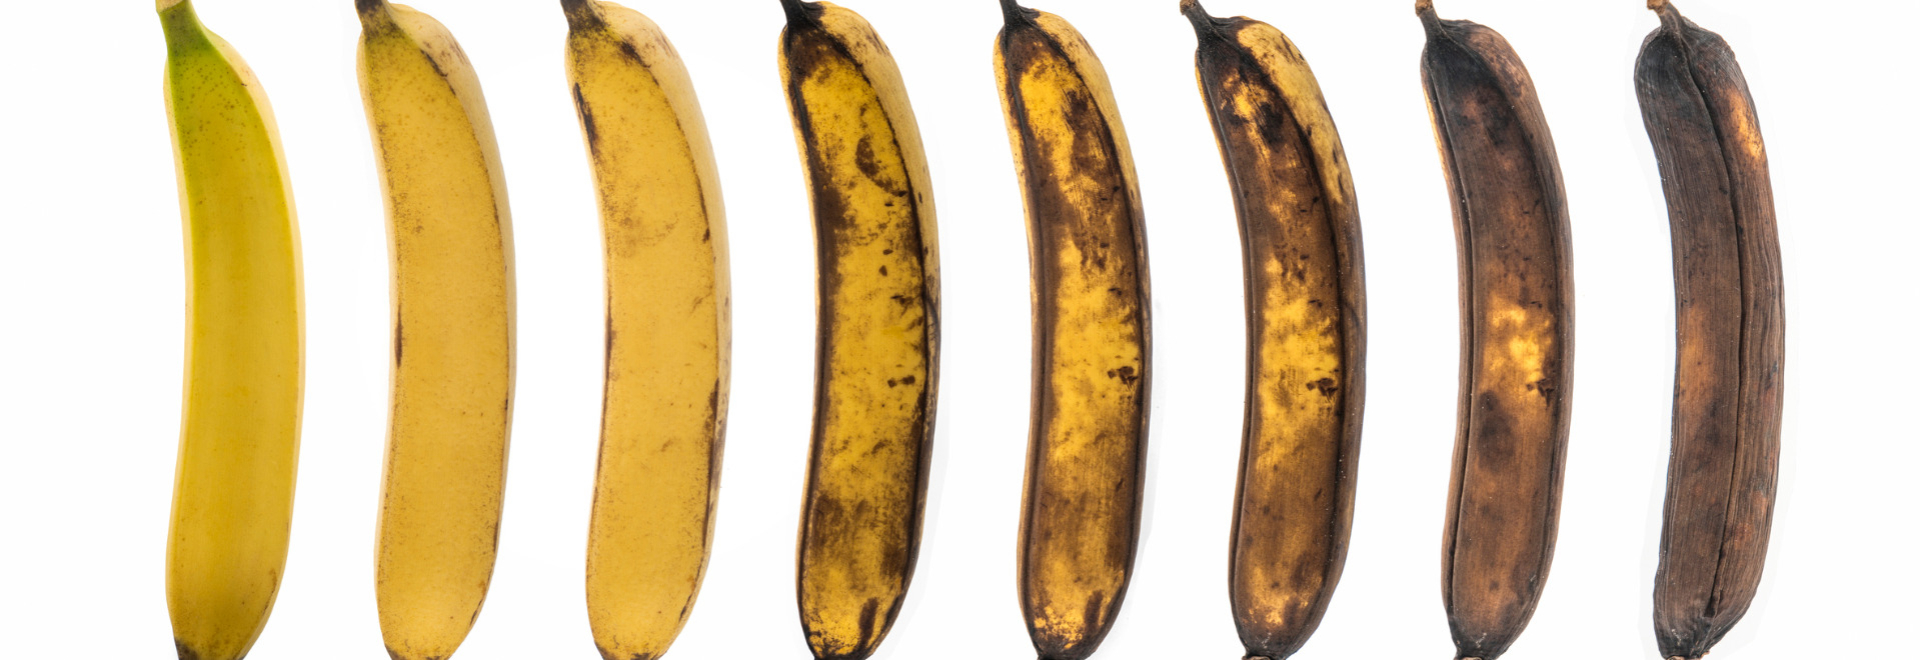 banana-ripening-stages-benefits-and-cancer-risks